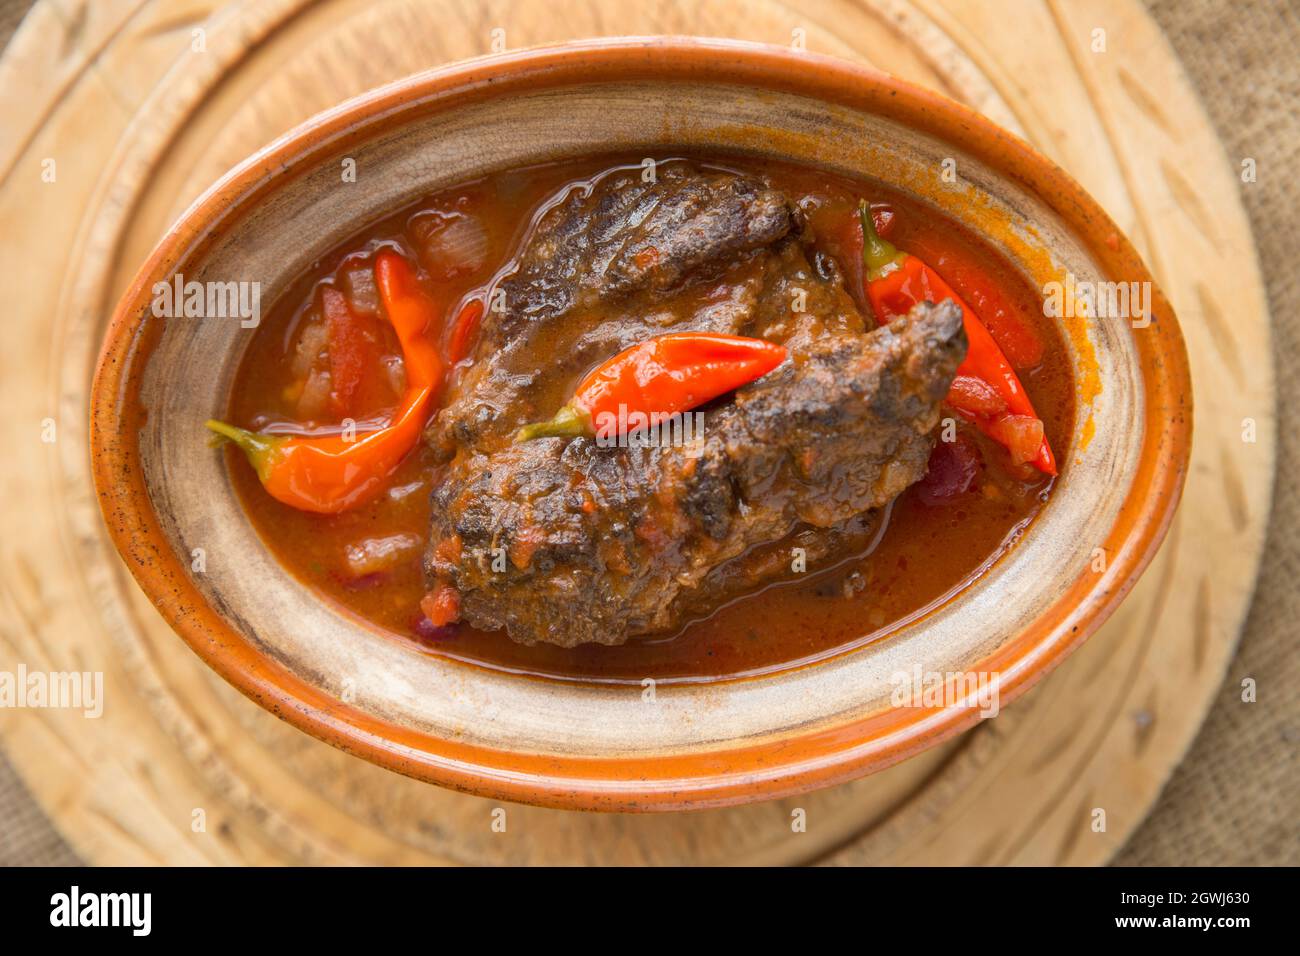 A stew made from slow cooked ox cheeks with vegetables, kidney beans and home grown chillies. England UK GB Stock Photo